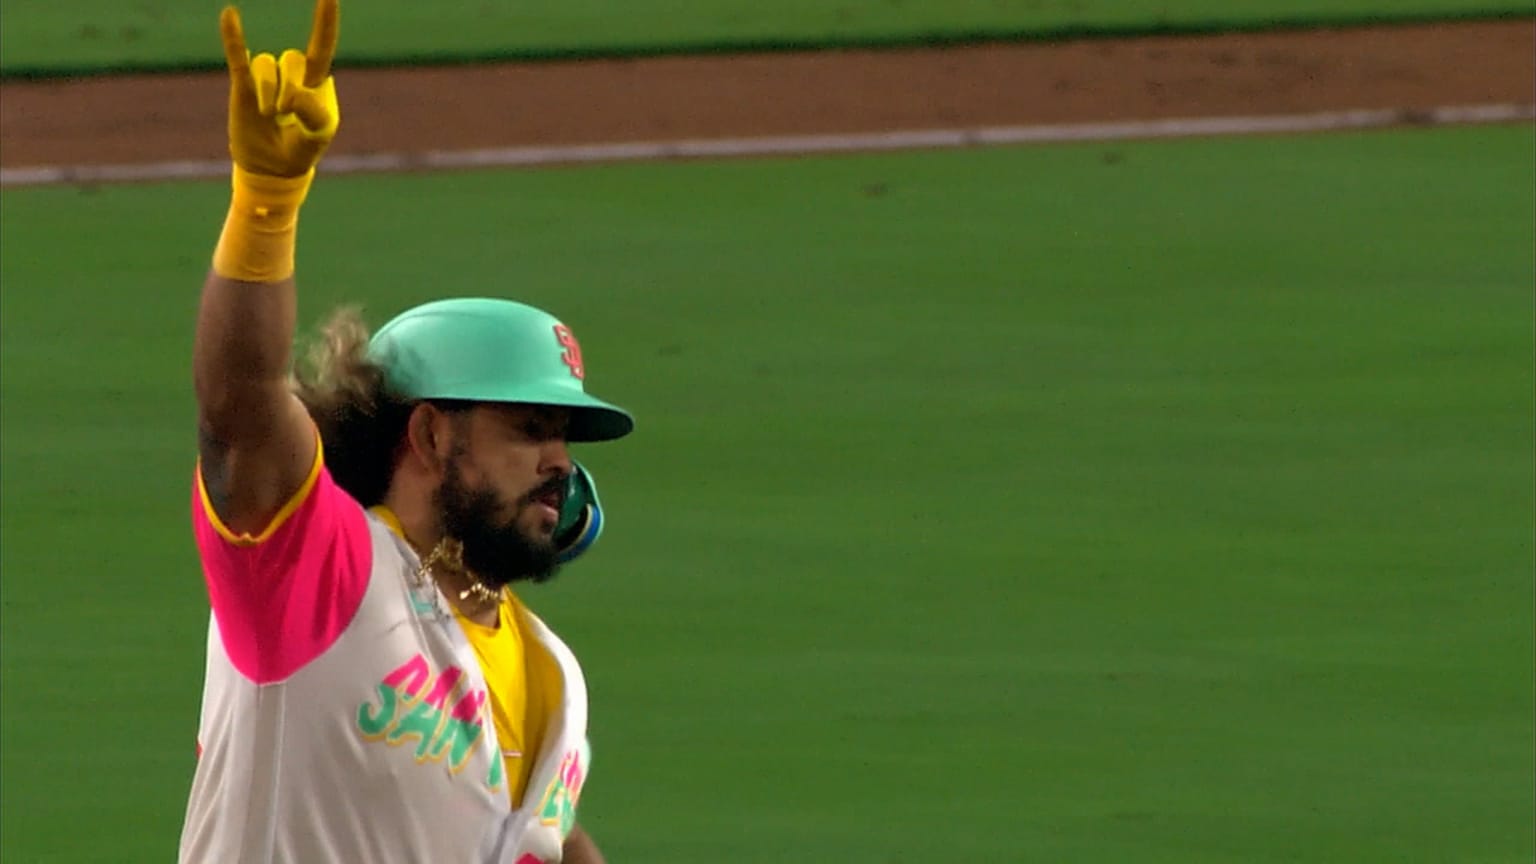 97.3 The Fan on X: Jorge Alfaro rocking the City Connect colors!   / X